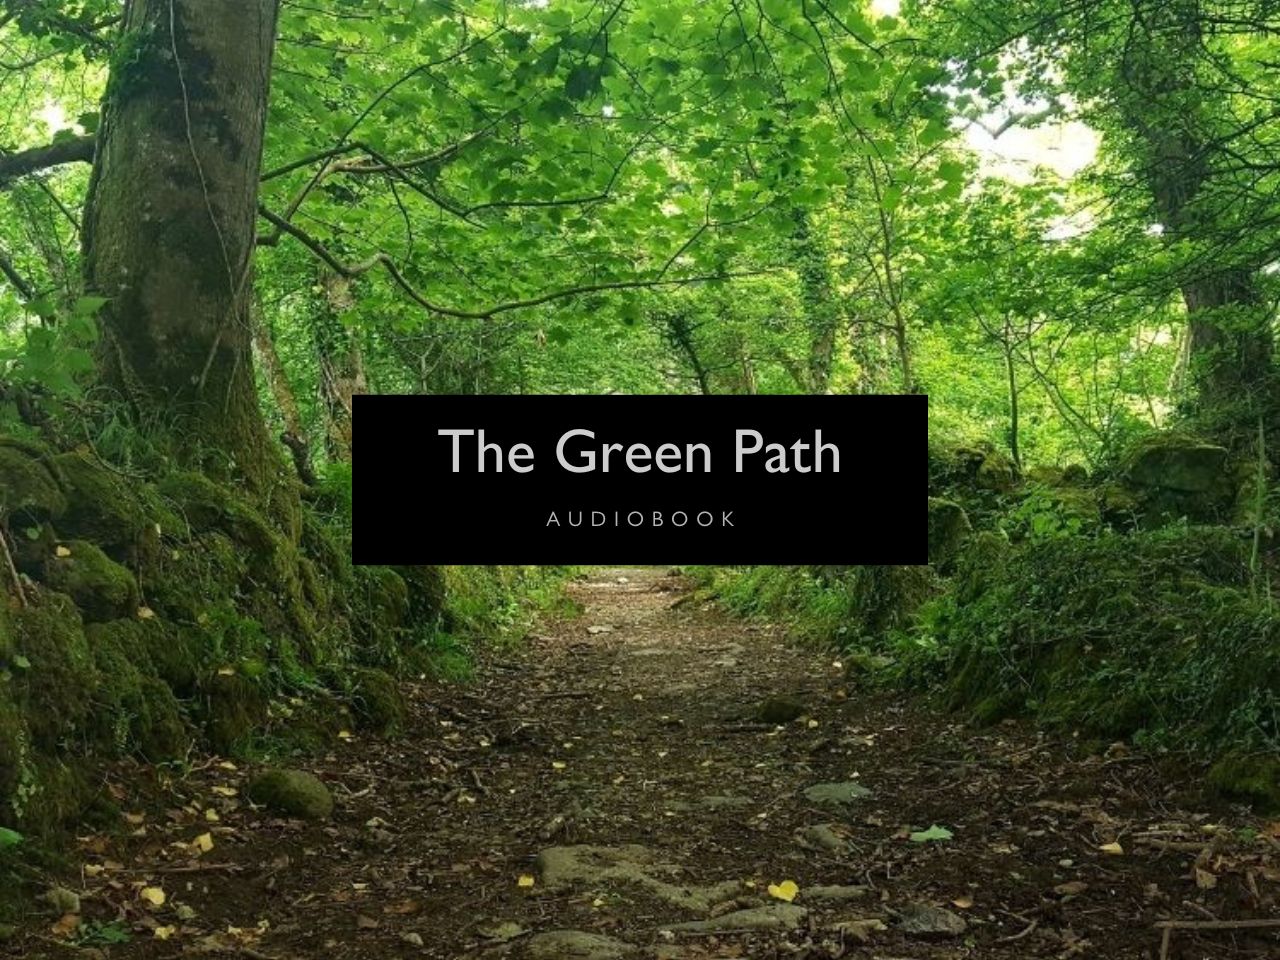 The Green Path Audiobook